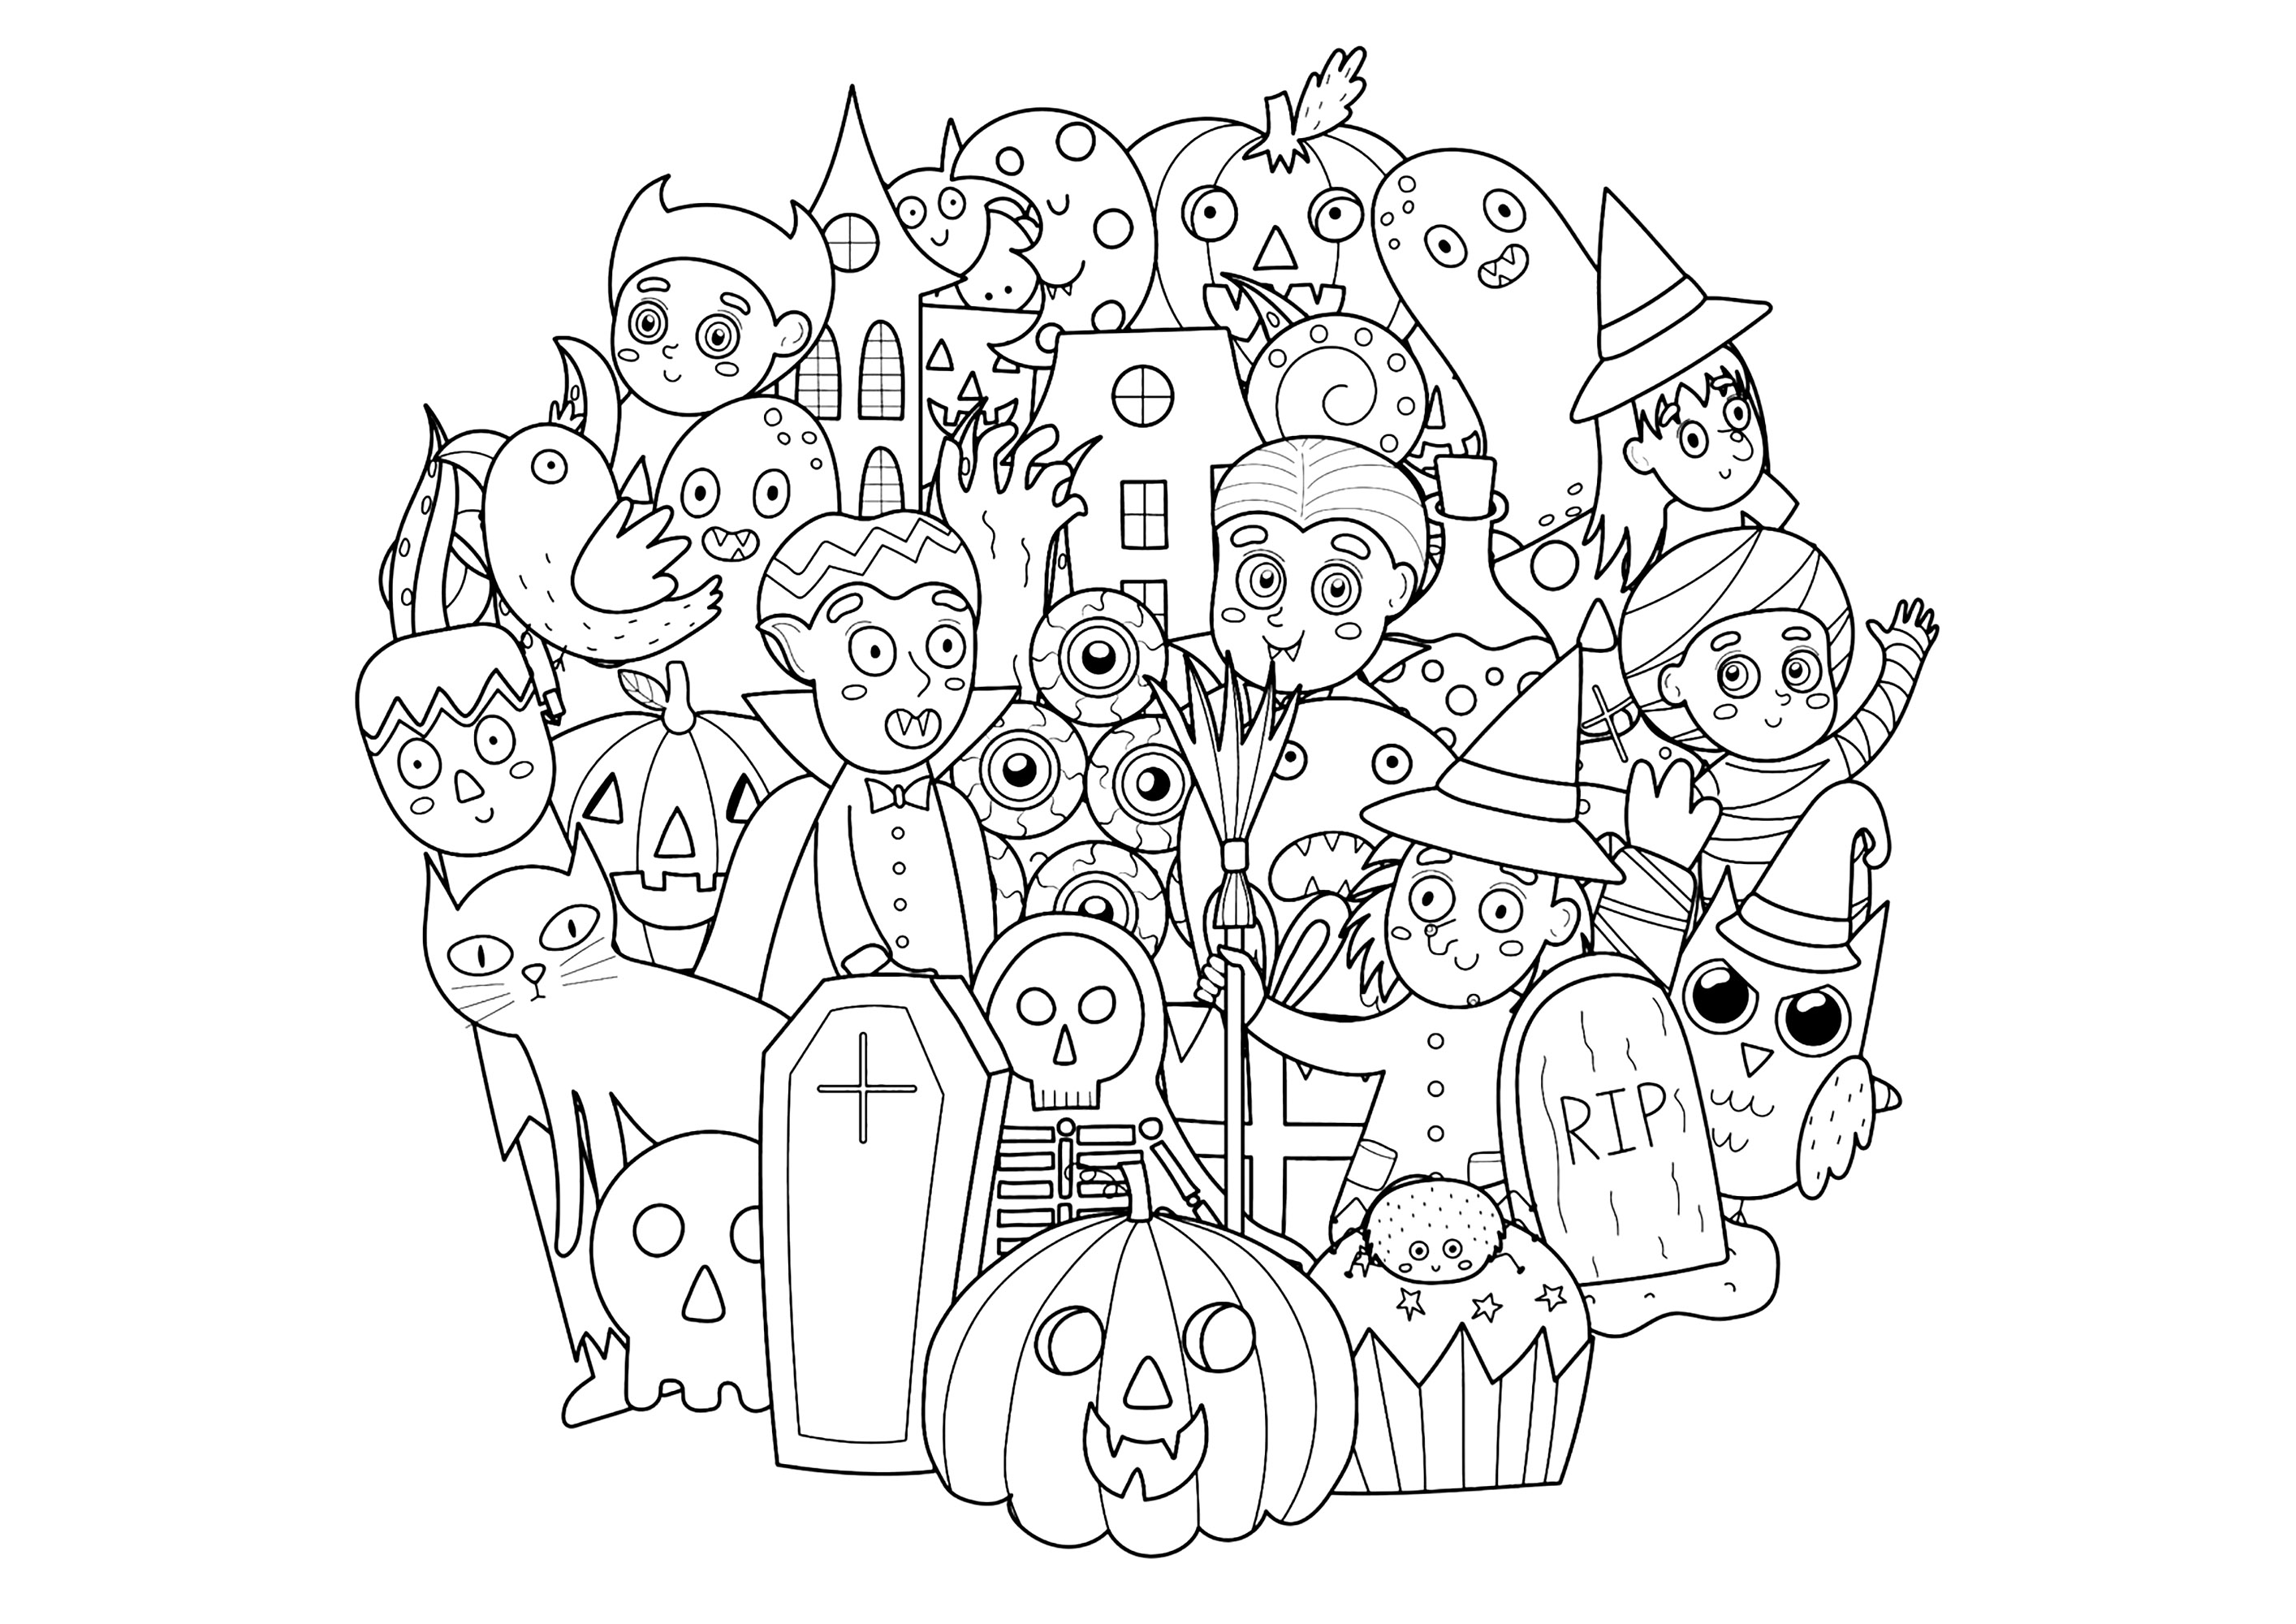 Halloween Doodle with characters